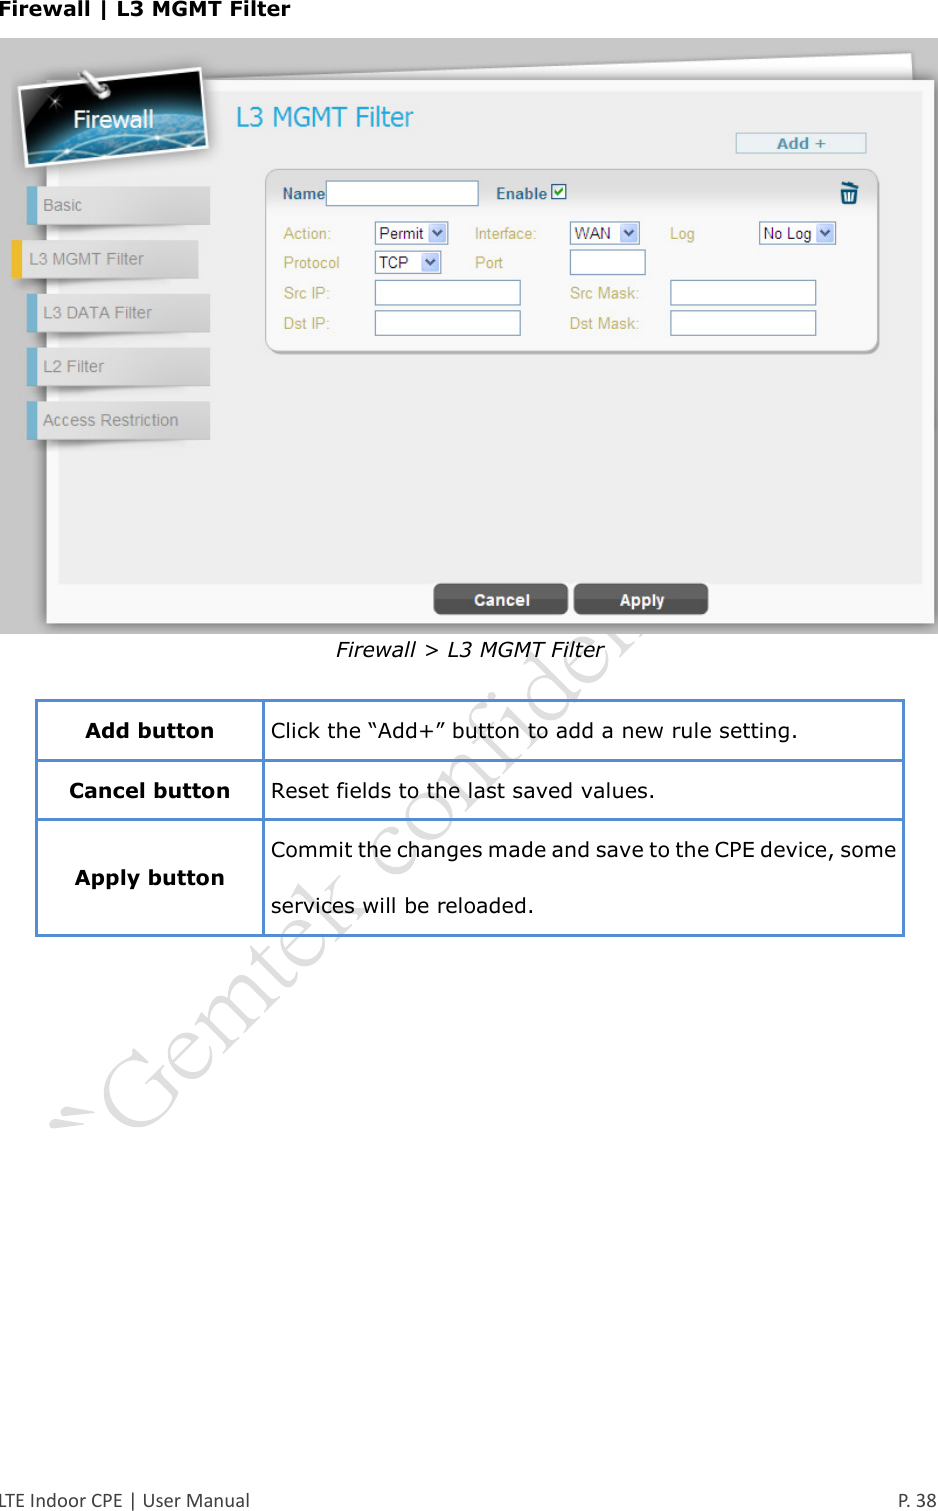  LTE Indoor CPE | User Manual      P. 38 Firewall | L3 MGMT Filter  Firewall &gt; L3 MGMT Filter  Add button Click the “Add+” button to add a new rule setting. Cancel button Reset fields to the last saved values. Apply button Commit the changes made and save to the CPE device, some services will be reloaded.    